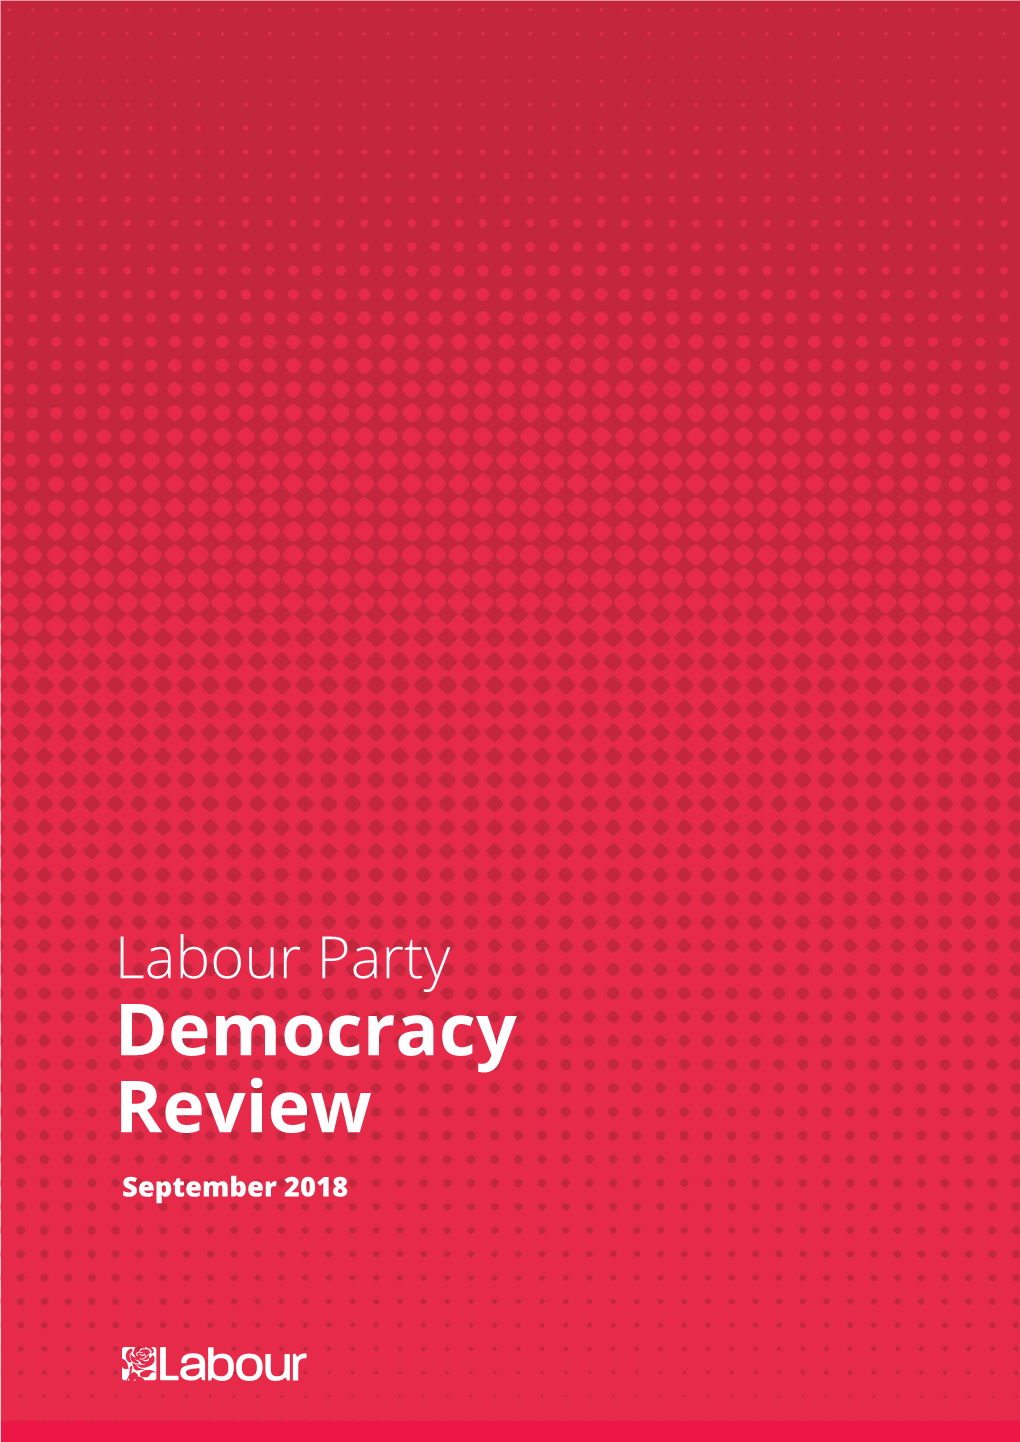 Democracy Review September 2018 CONTENTS